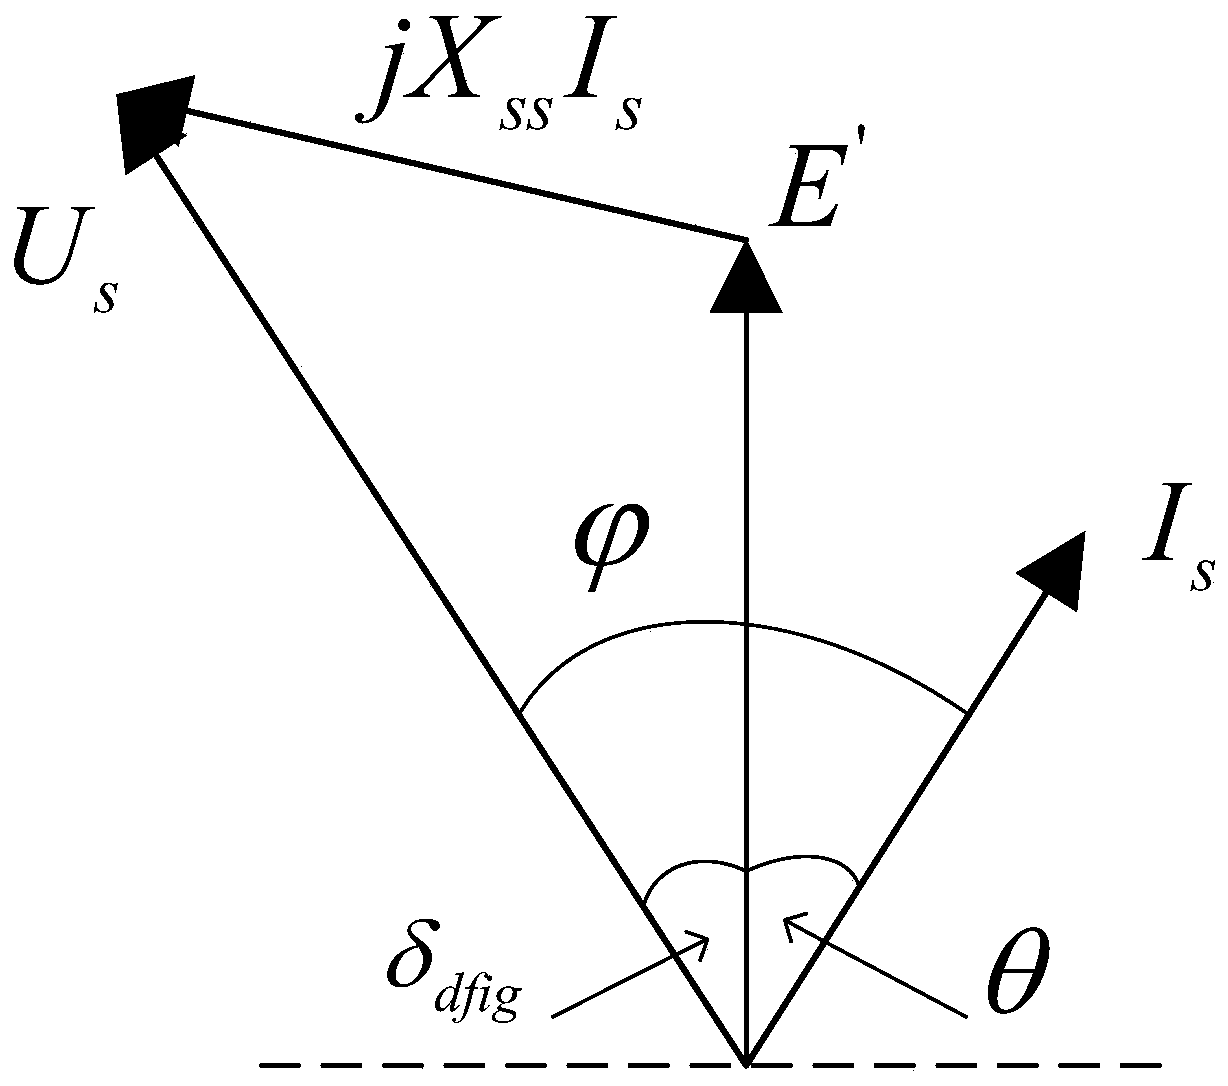 A Dynamic Equivalence Method of DFIG Based on Equivalent Power Angle Coherence